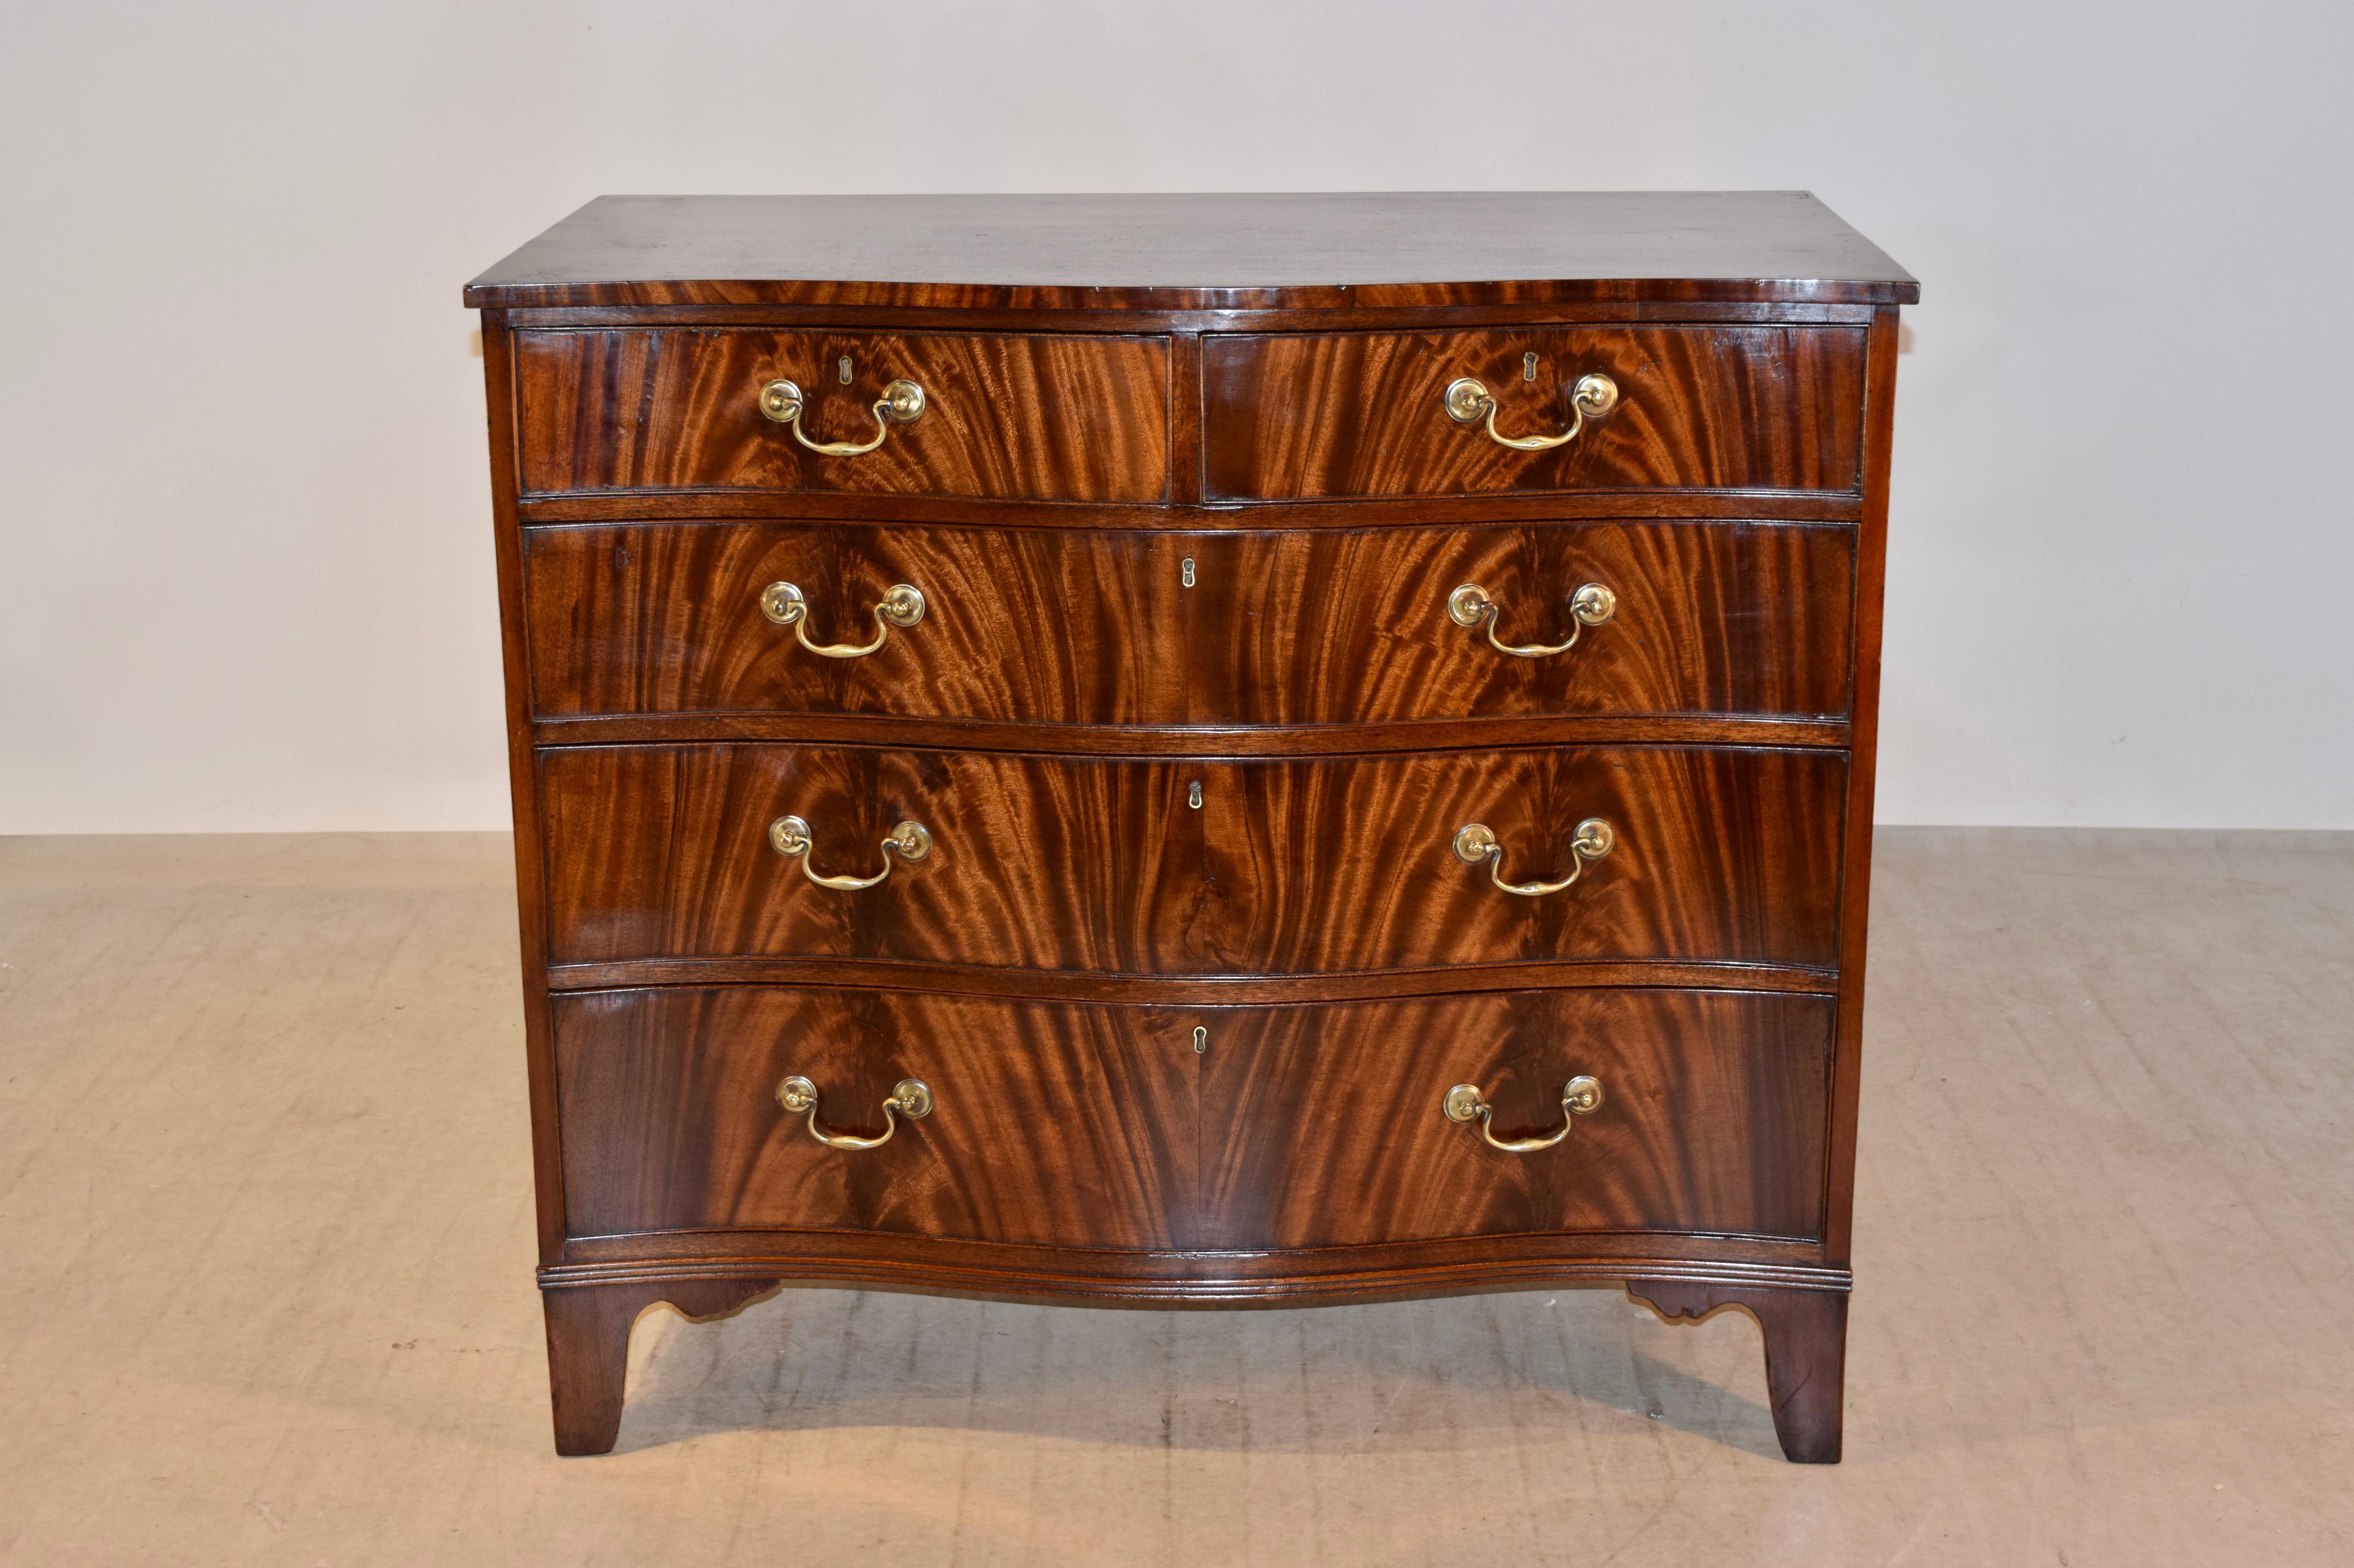 18th century serpentine front chest of drawers from Ireland. The top is serpentine shaped to complement the lines of the case, and is nicely grained. The case has simple sides and a serpentine shaped front with two over three drawer configuration,